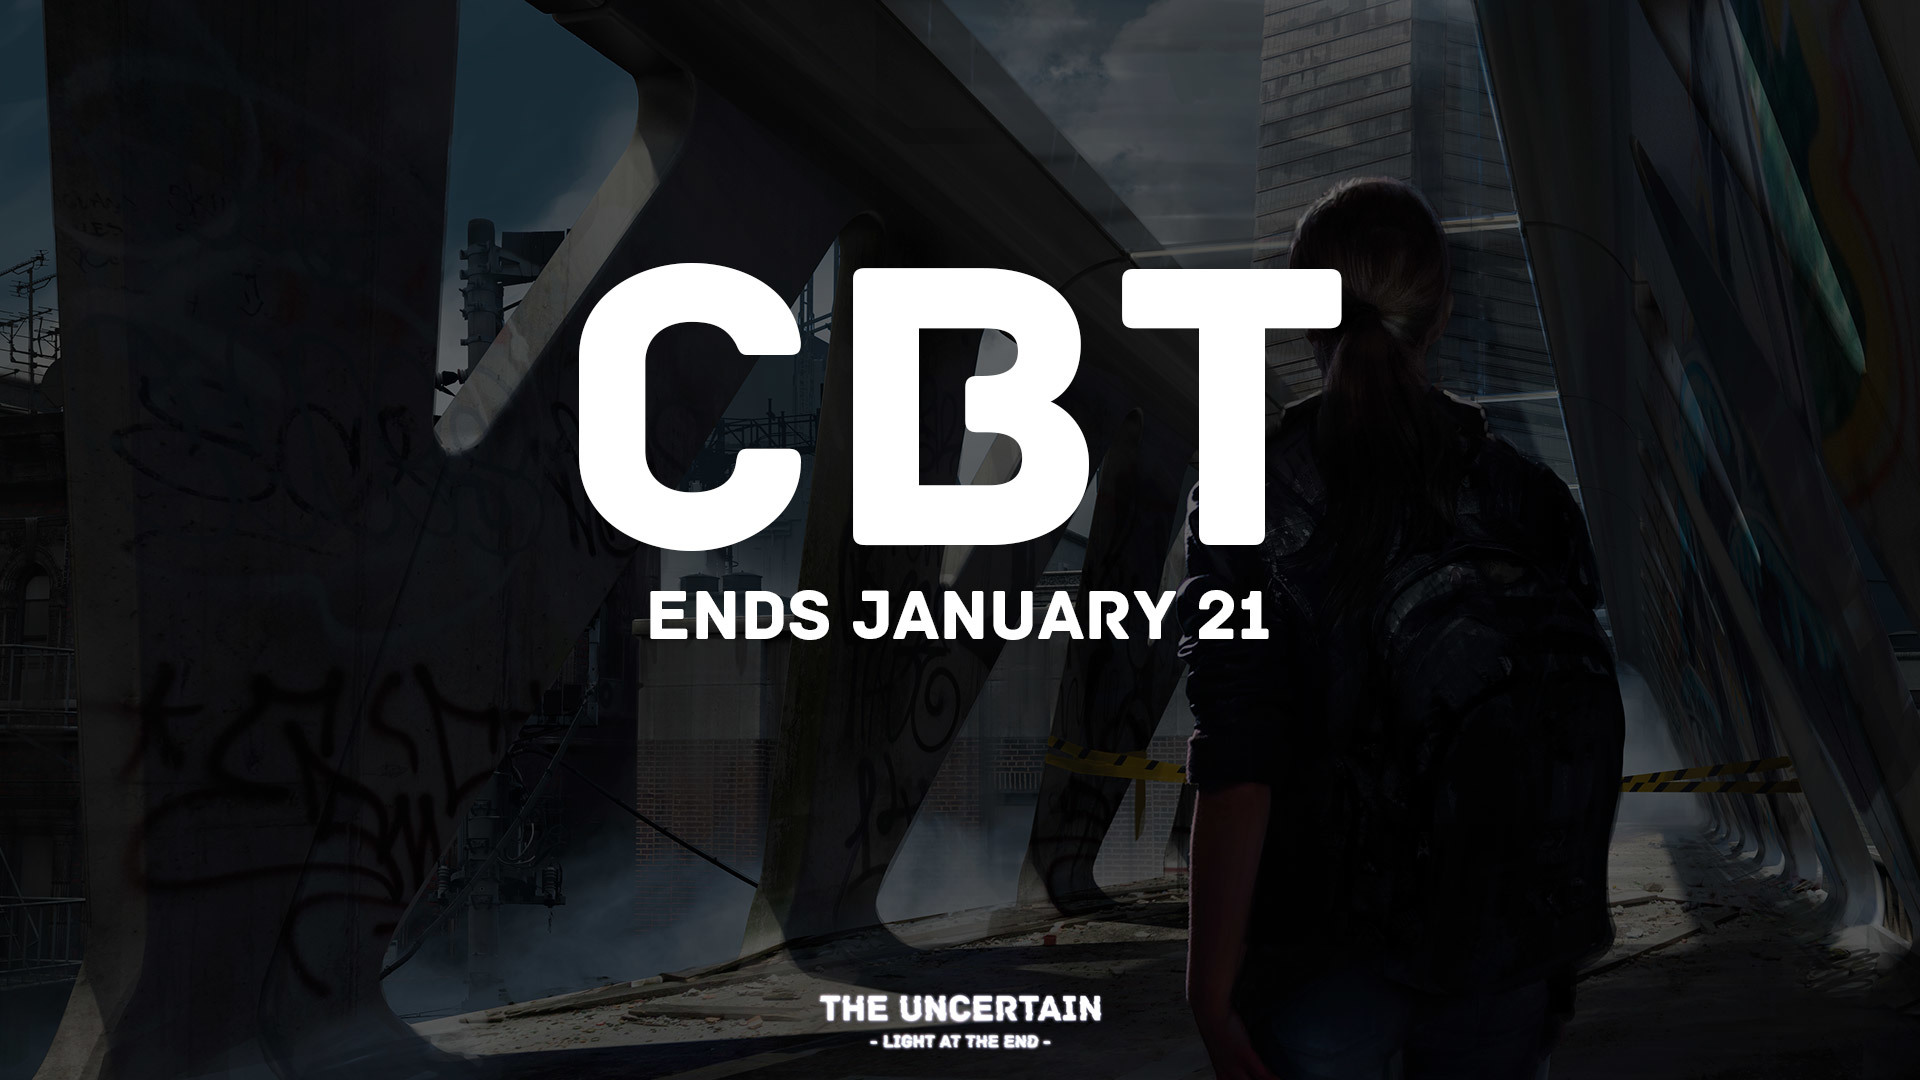 Jan 15 The Beta test ends on January 21! The Uncertain: Light ... - 